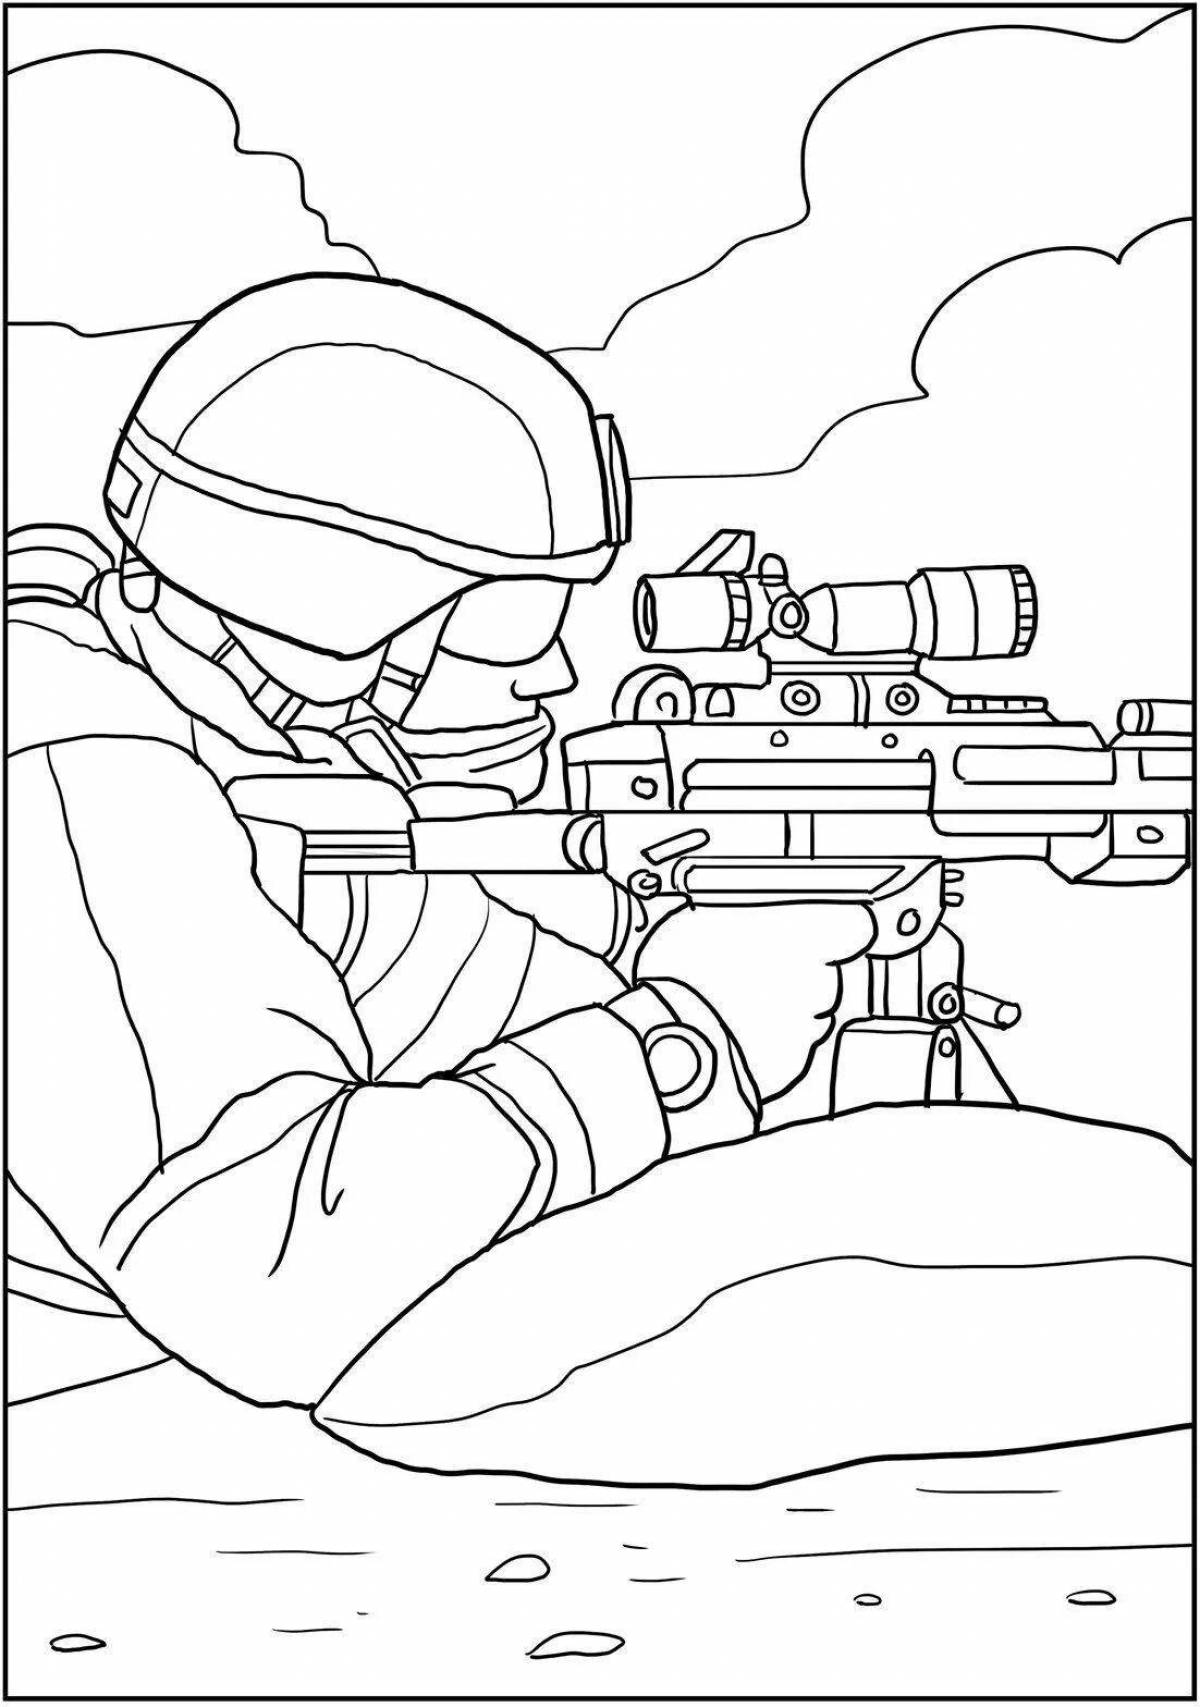 Coloring majestic army special forces